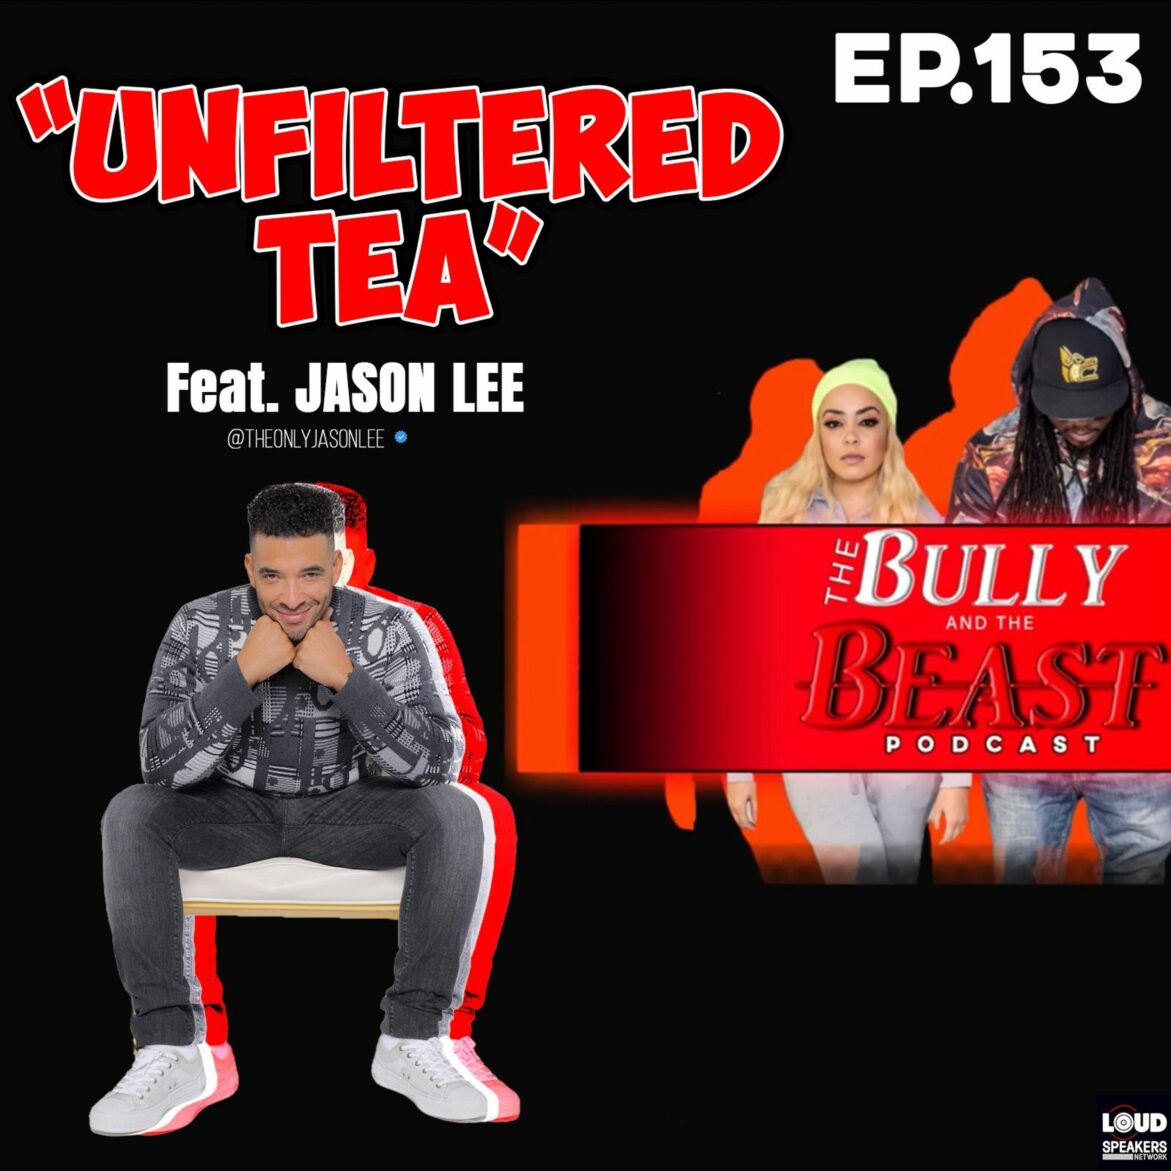 Black Podcasting - Ep. 153 "Unfiltered Tea" with Jason Lee